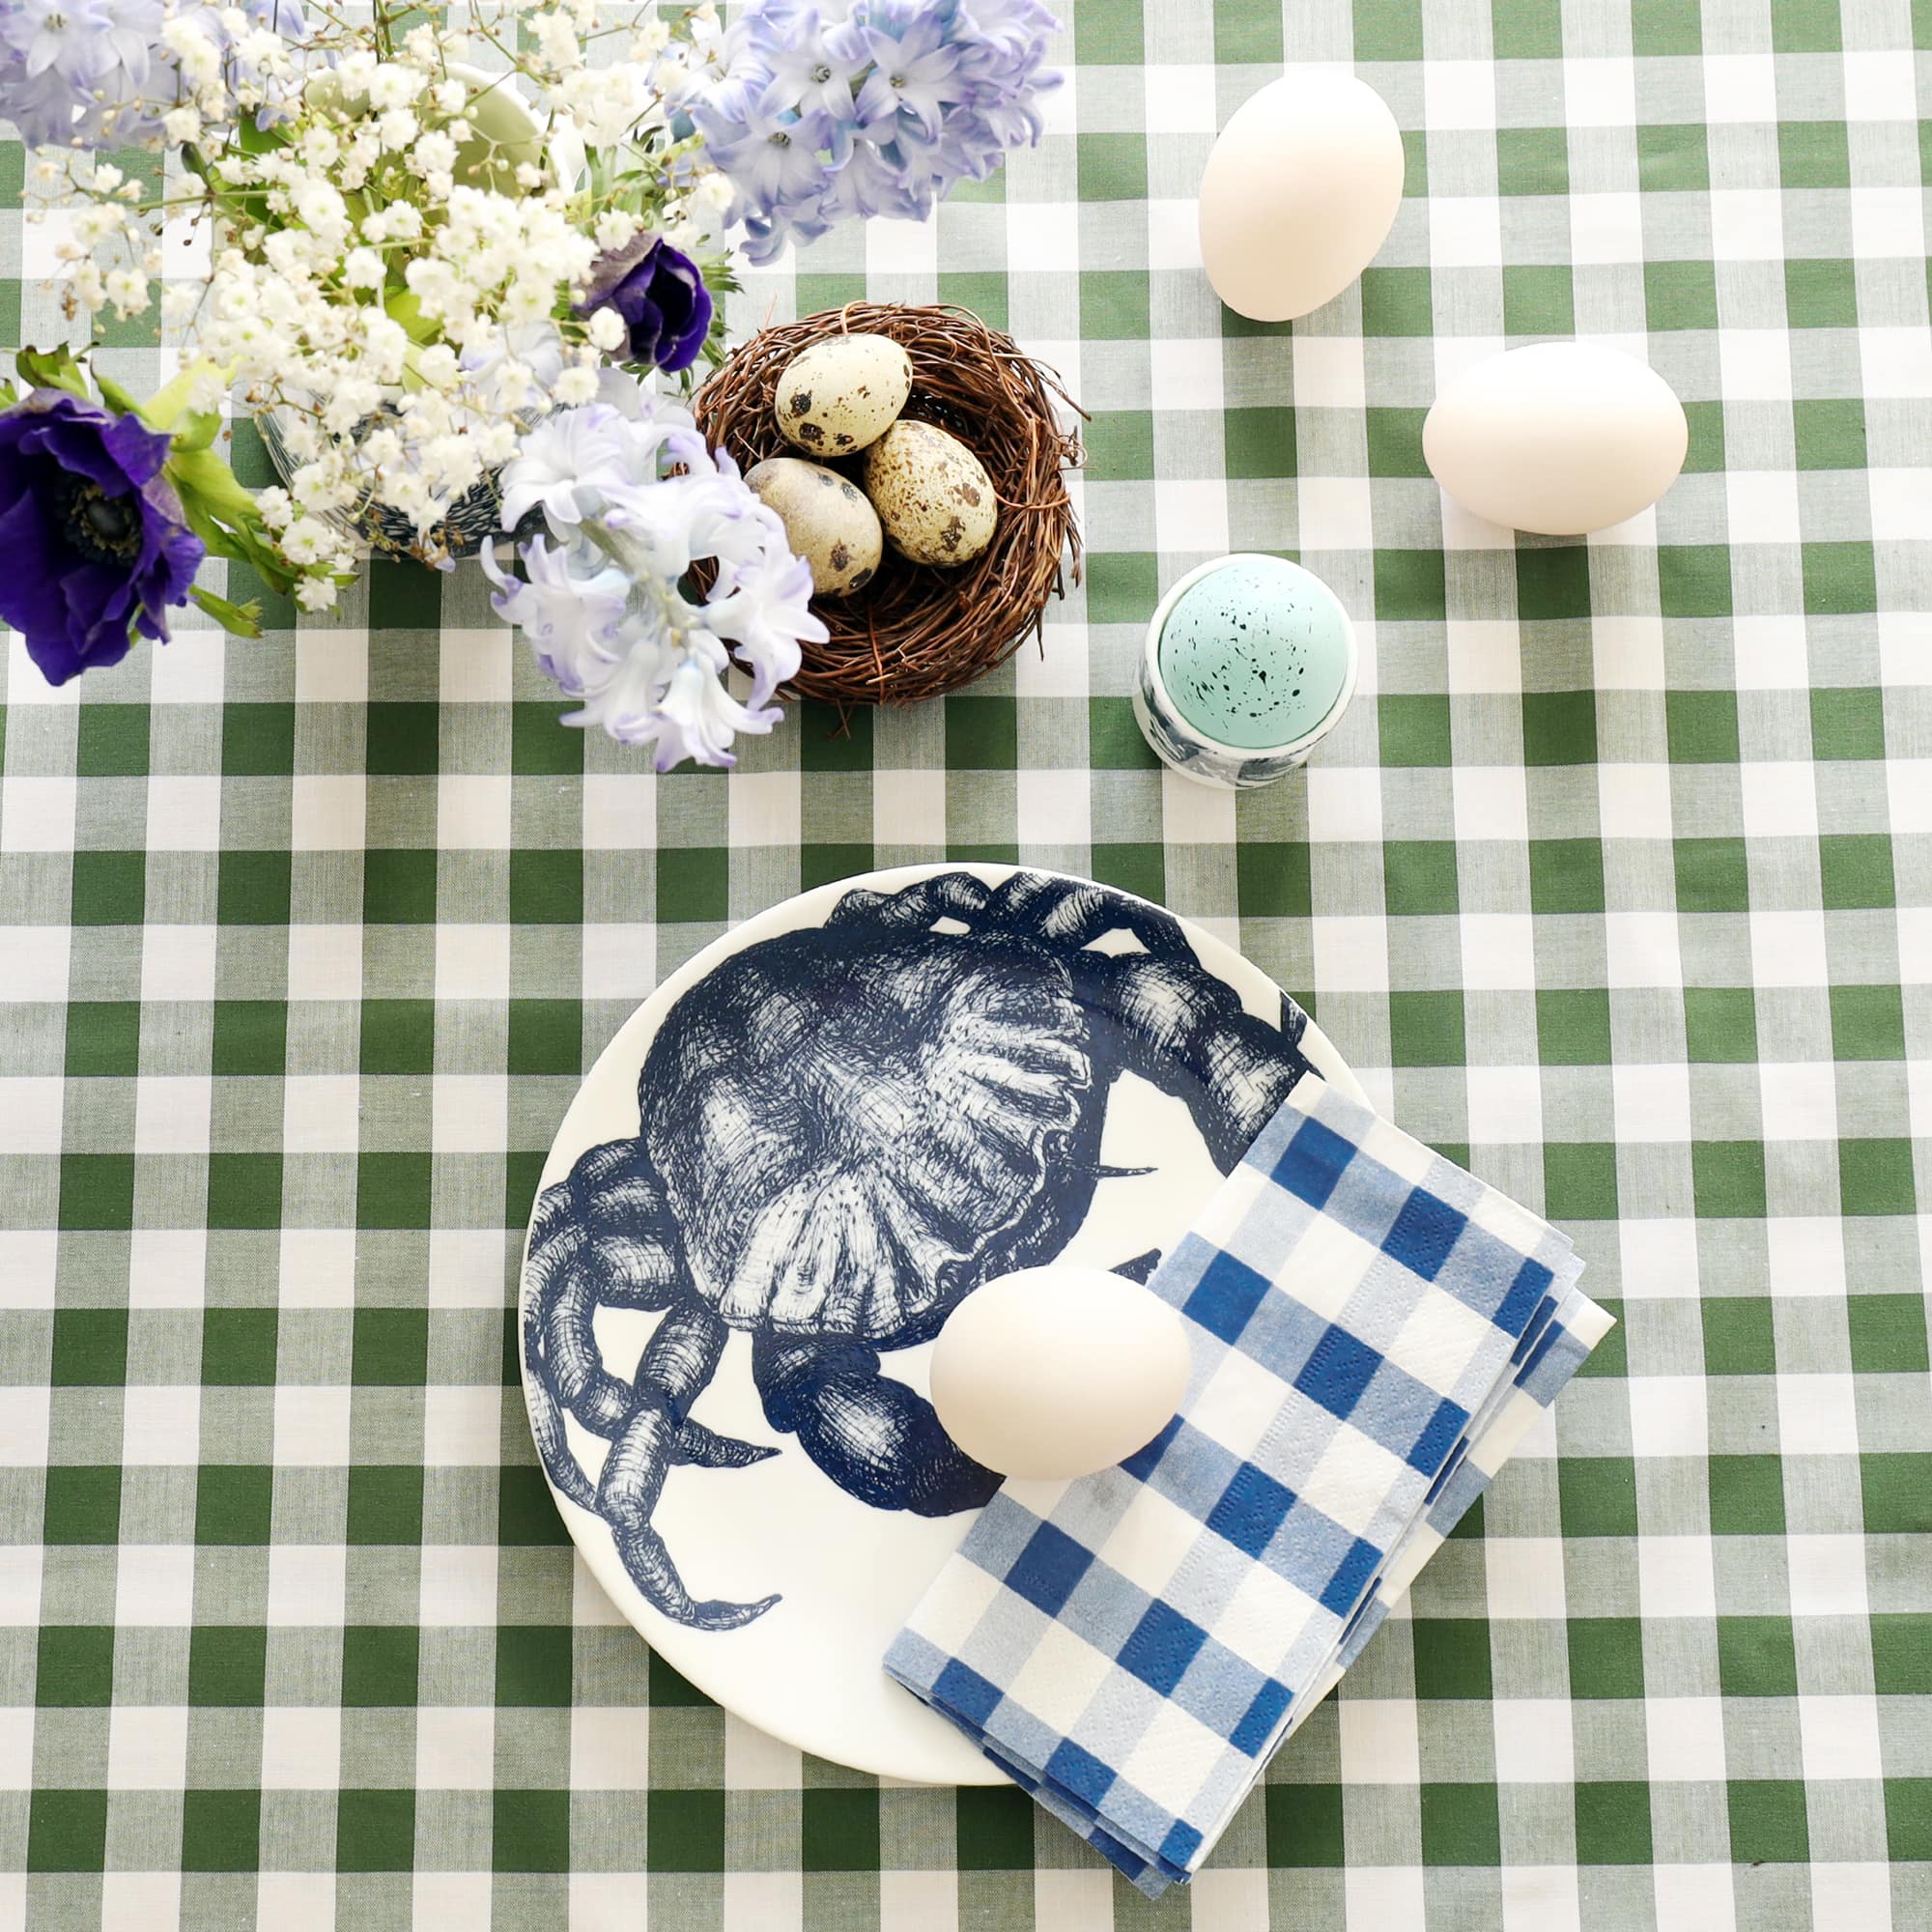 White bone china plate with crab illustration in navy on it. There is a folded blue gingham napkin and duck egg on the plate. There is a green gingham tablecloth on the table with eggs and spring flowers to decorate.